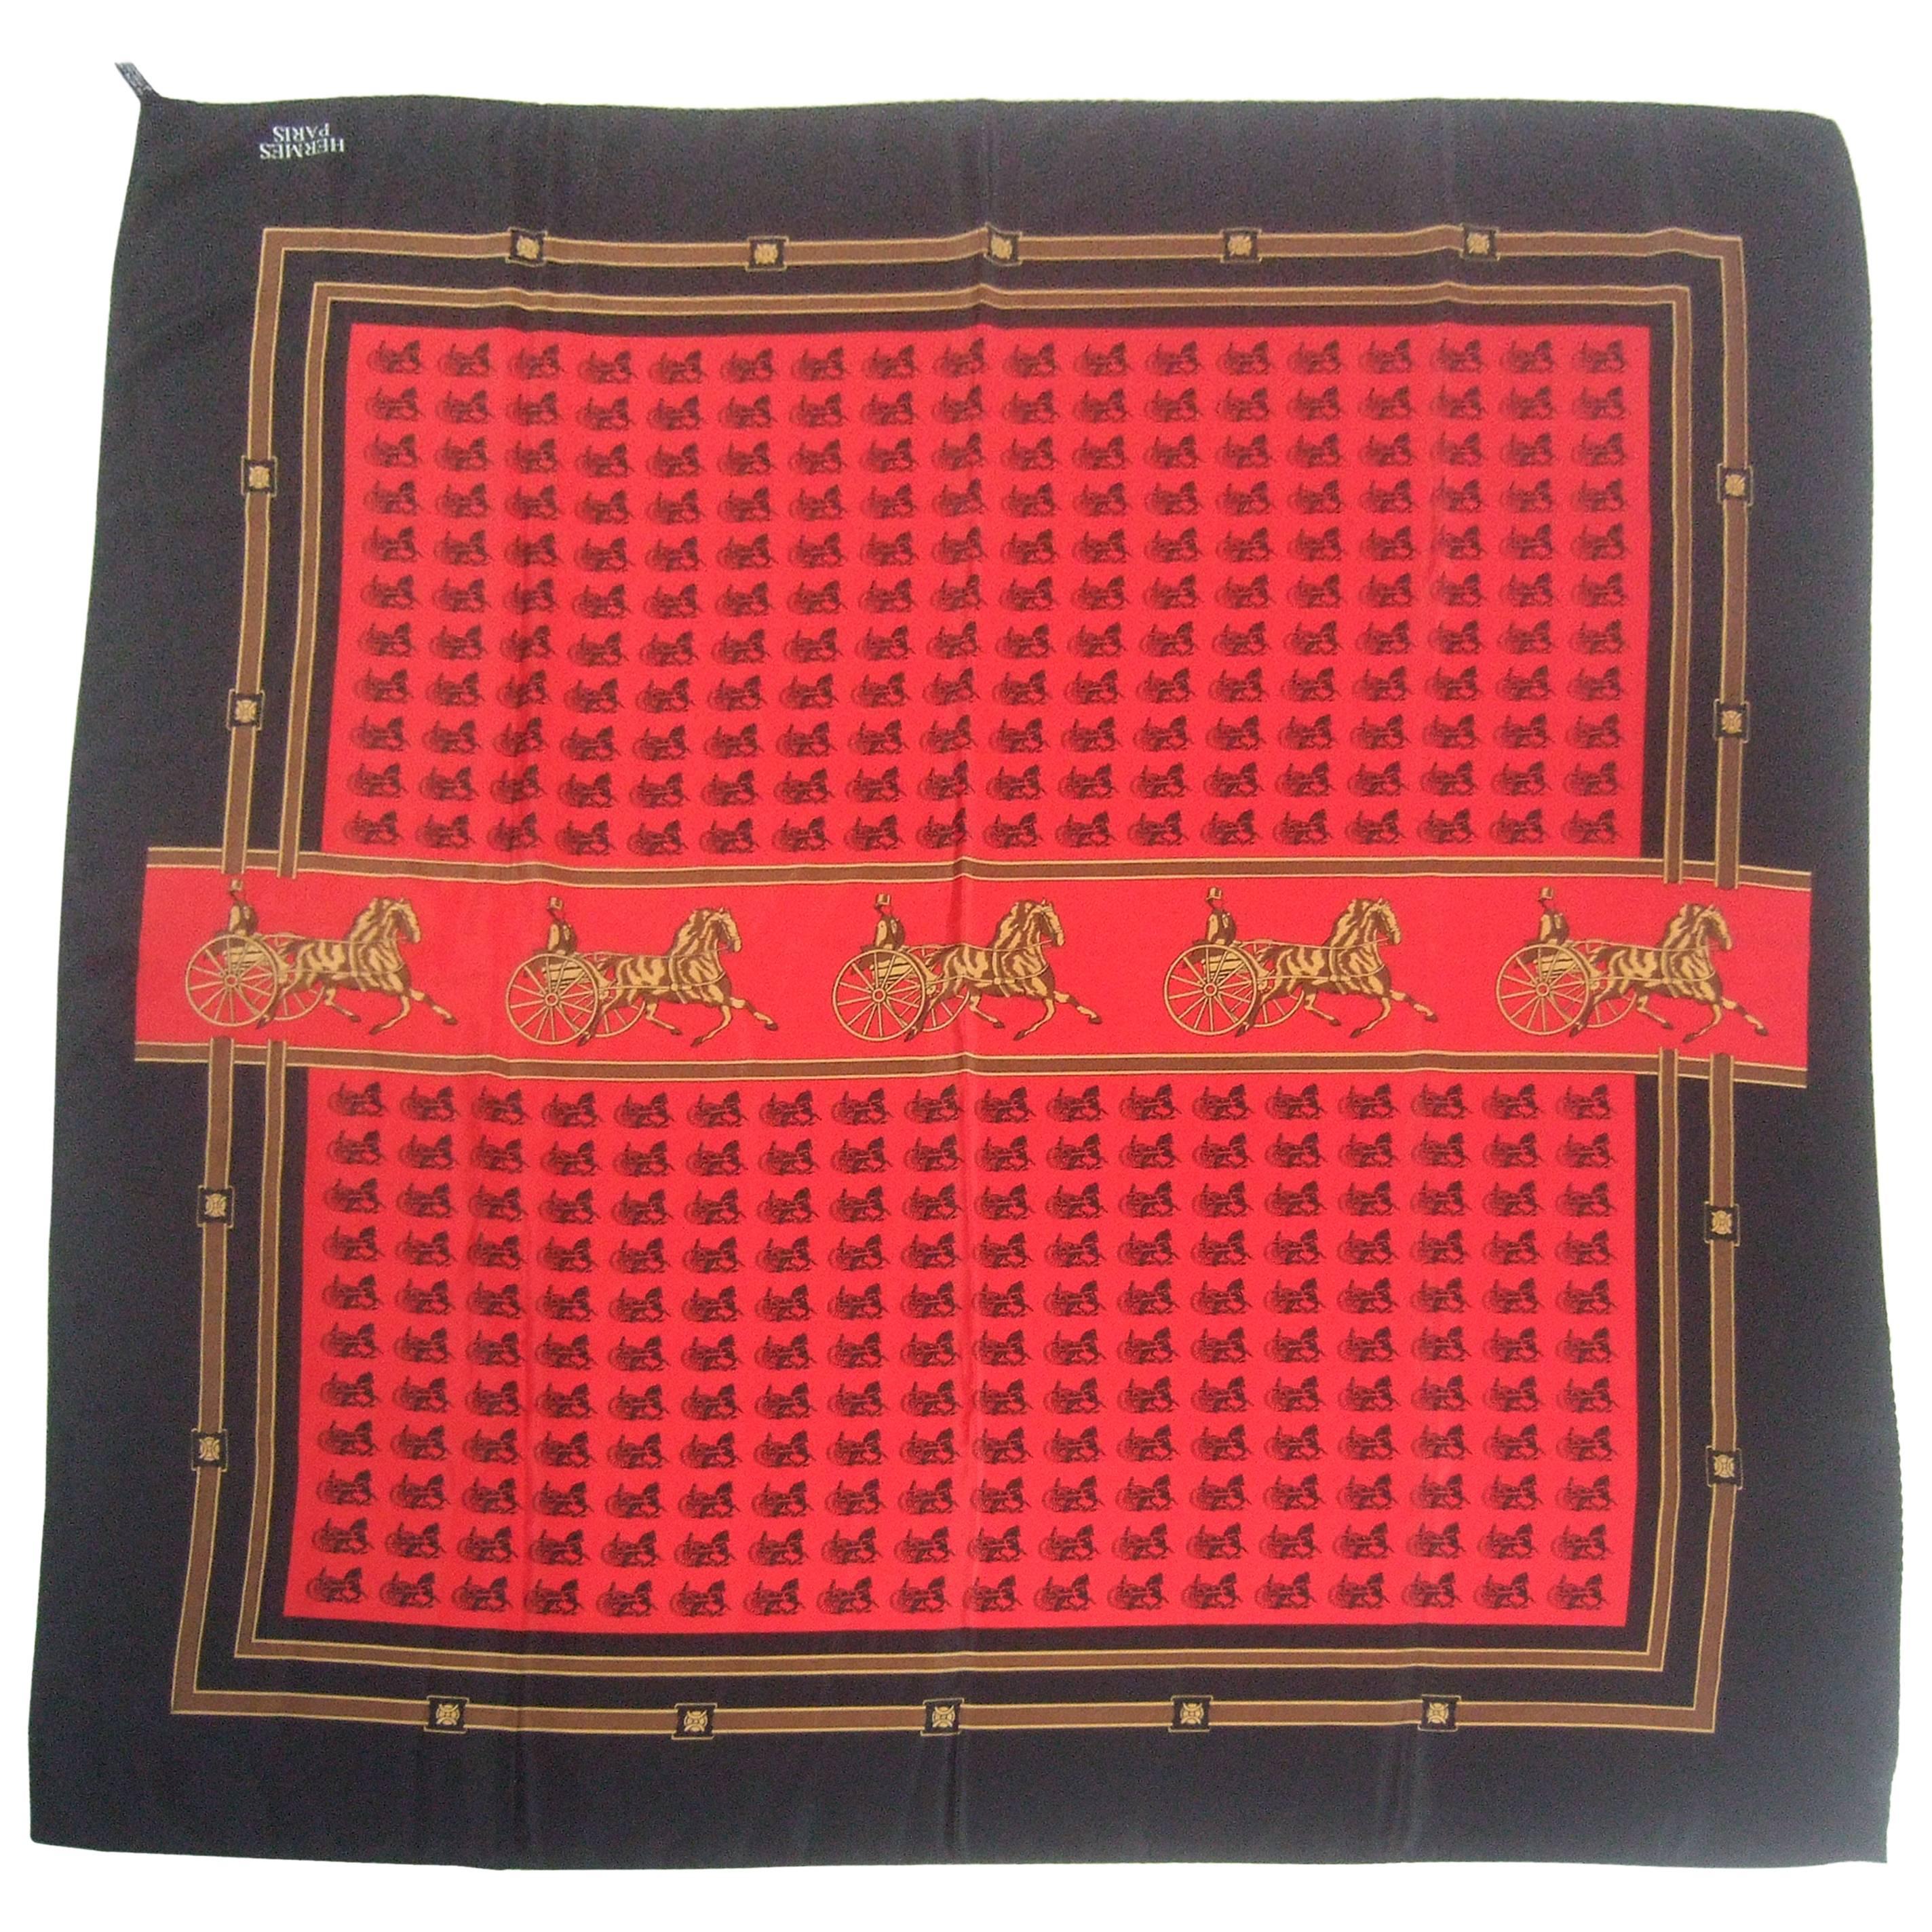 Hermes Paris Silk Horse and Carriage Scarf in Hermes Box 